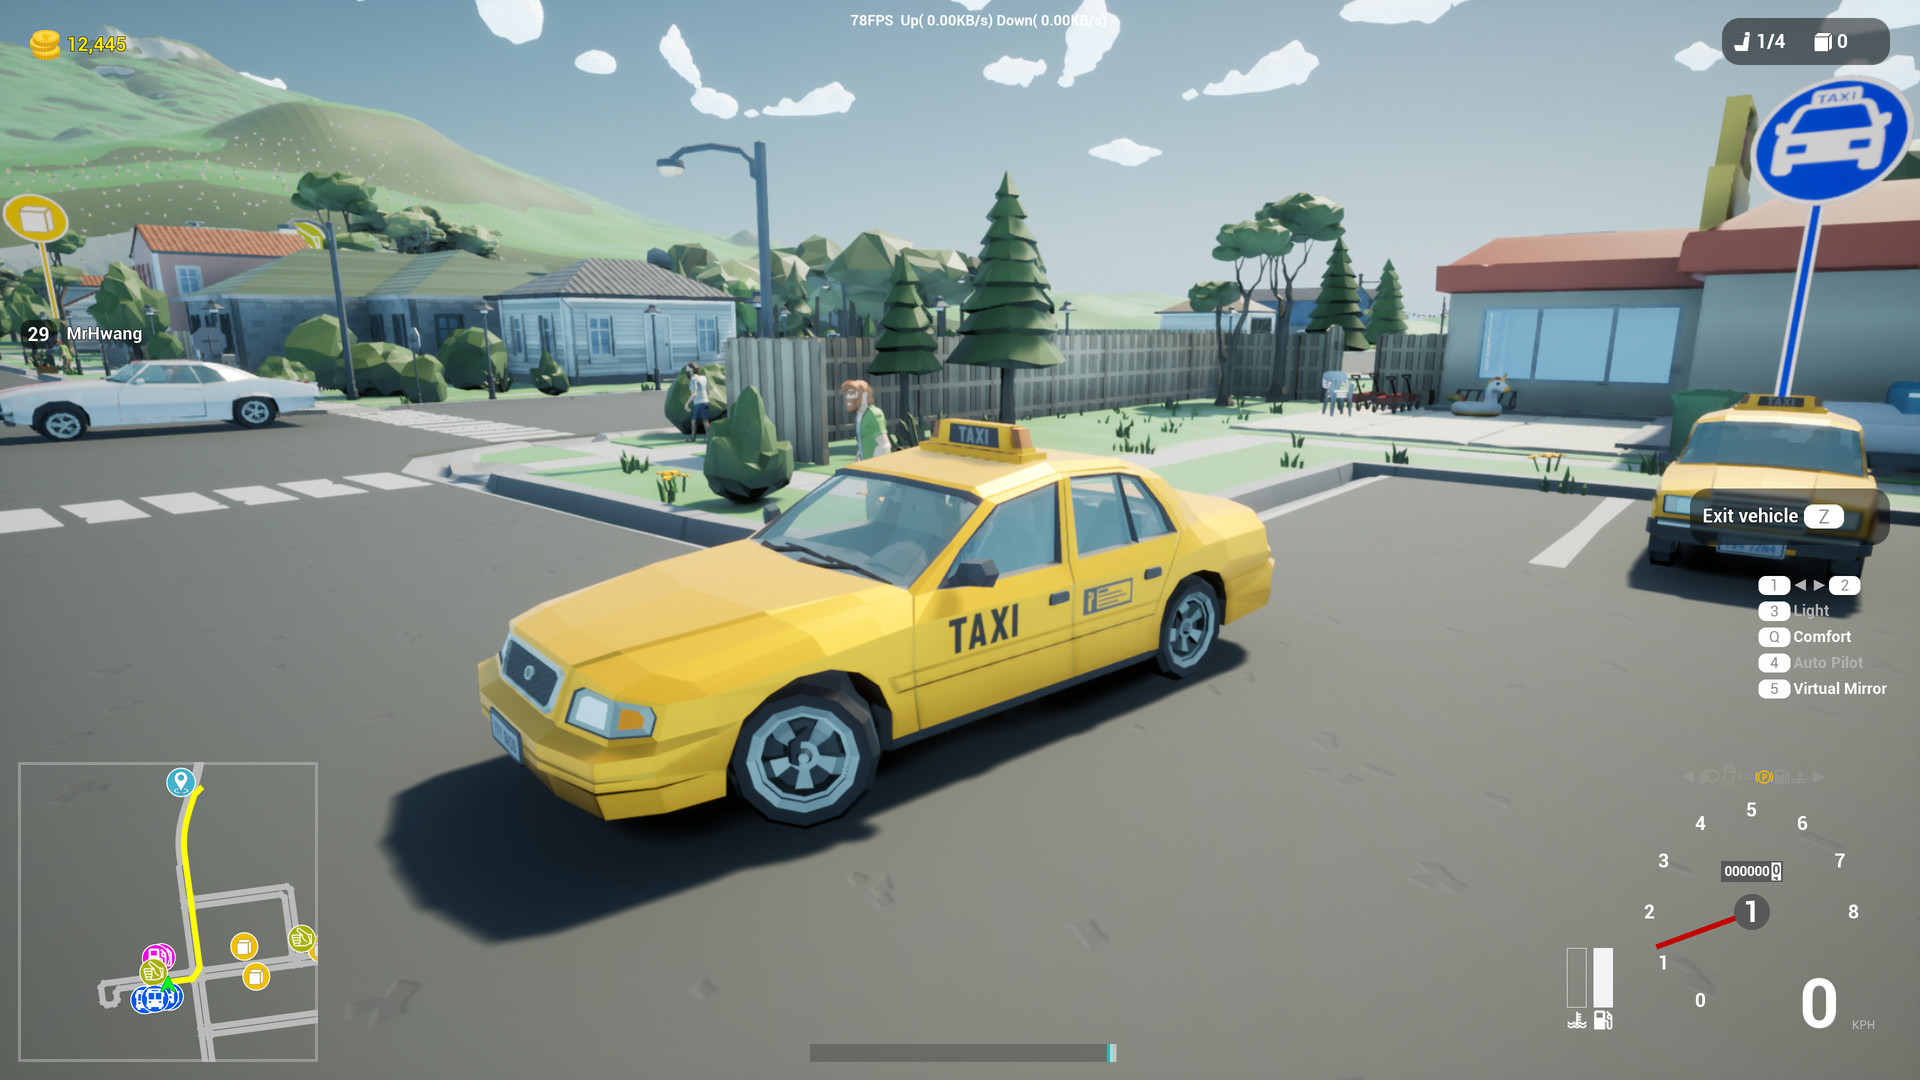 Motor Town: Behind The Wheel on Steam